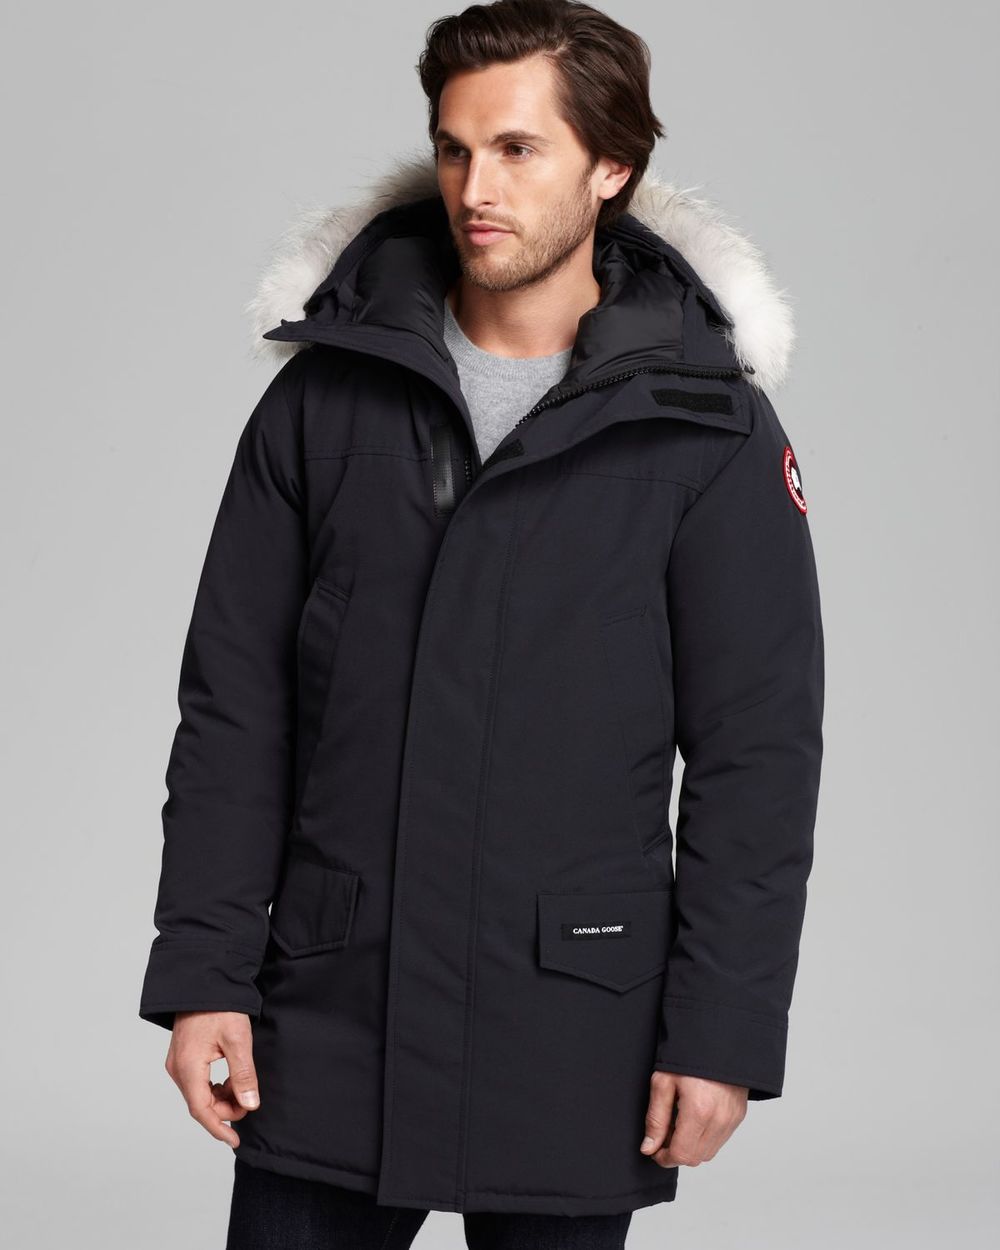 Canada Goose coats sale discounts - 9 Canada Goose Alternatives To Fit Every Budget �� AS RAKESTRAW ...